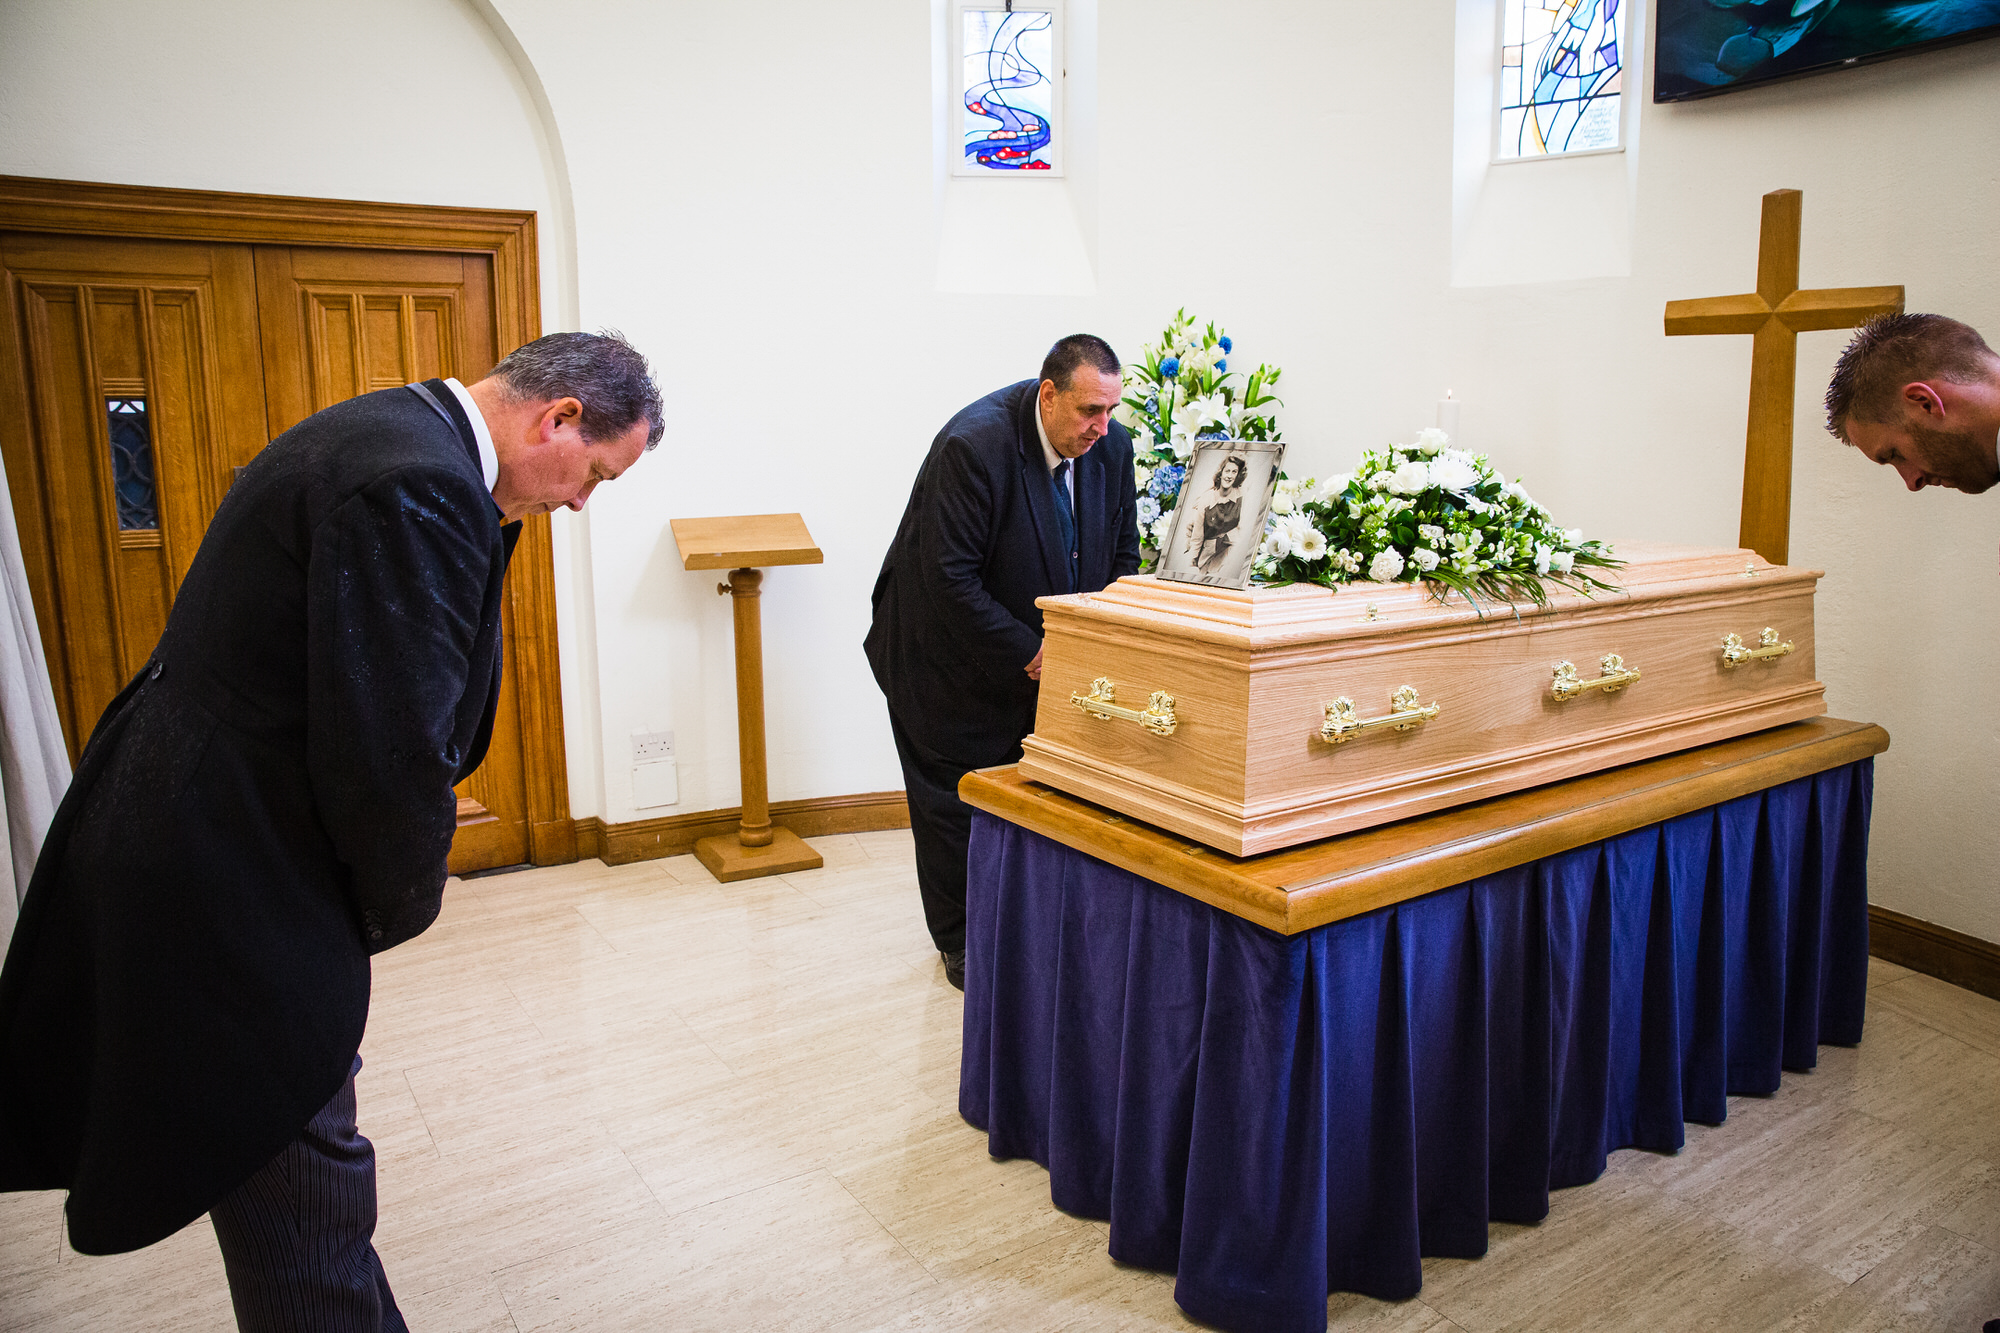 Funeral Photographer at South West Middlesex Crematorium